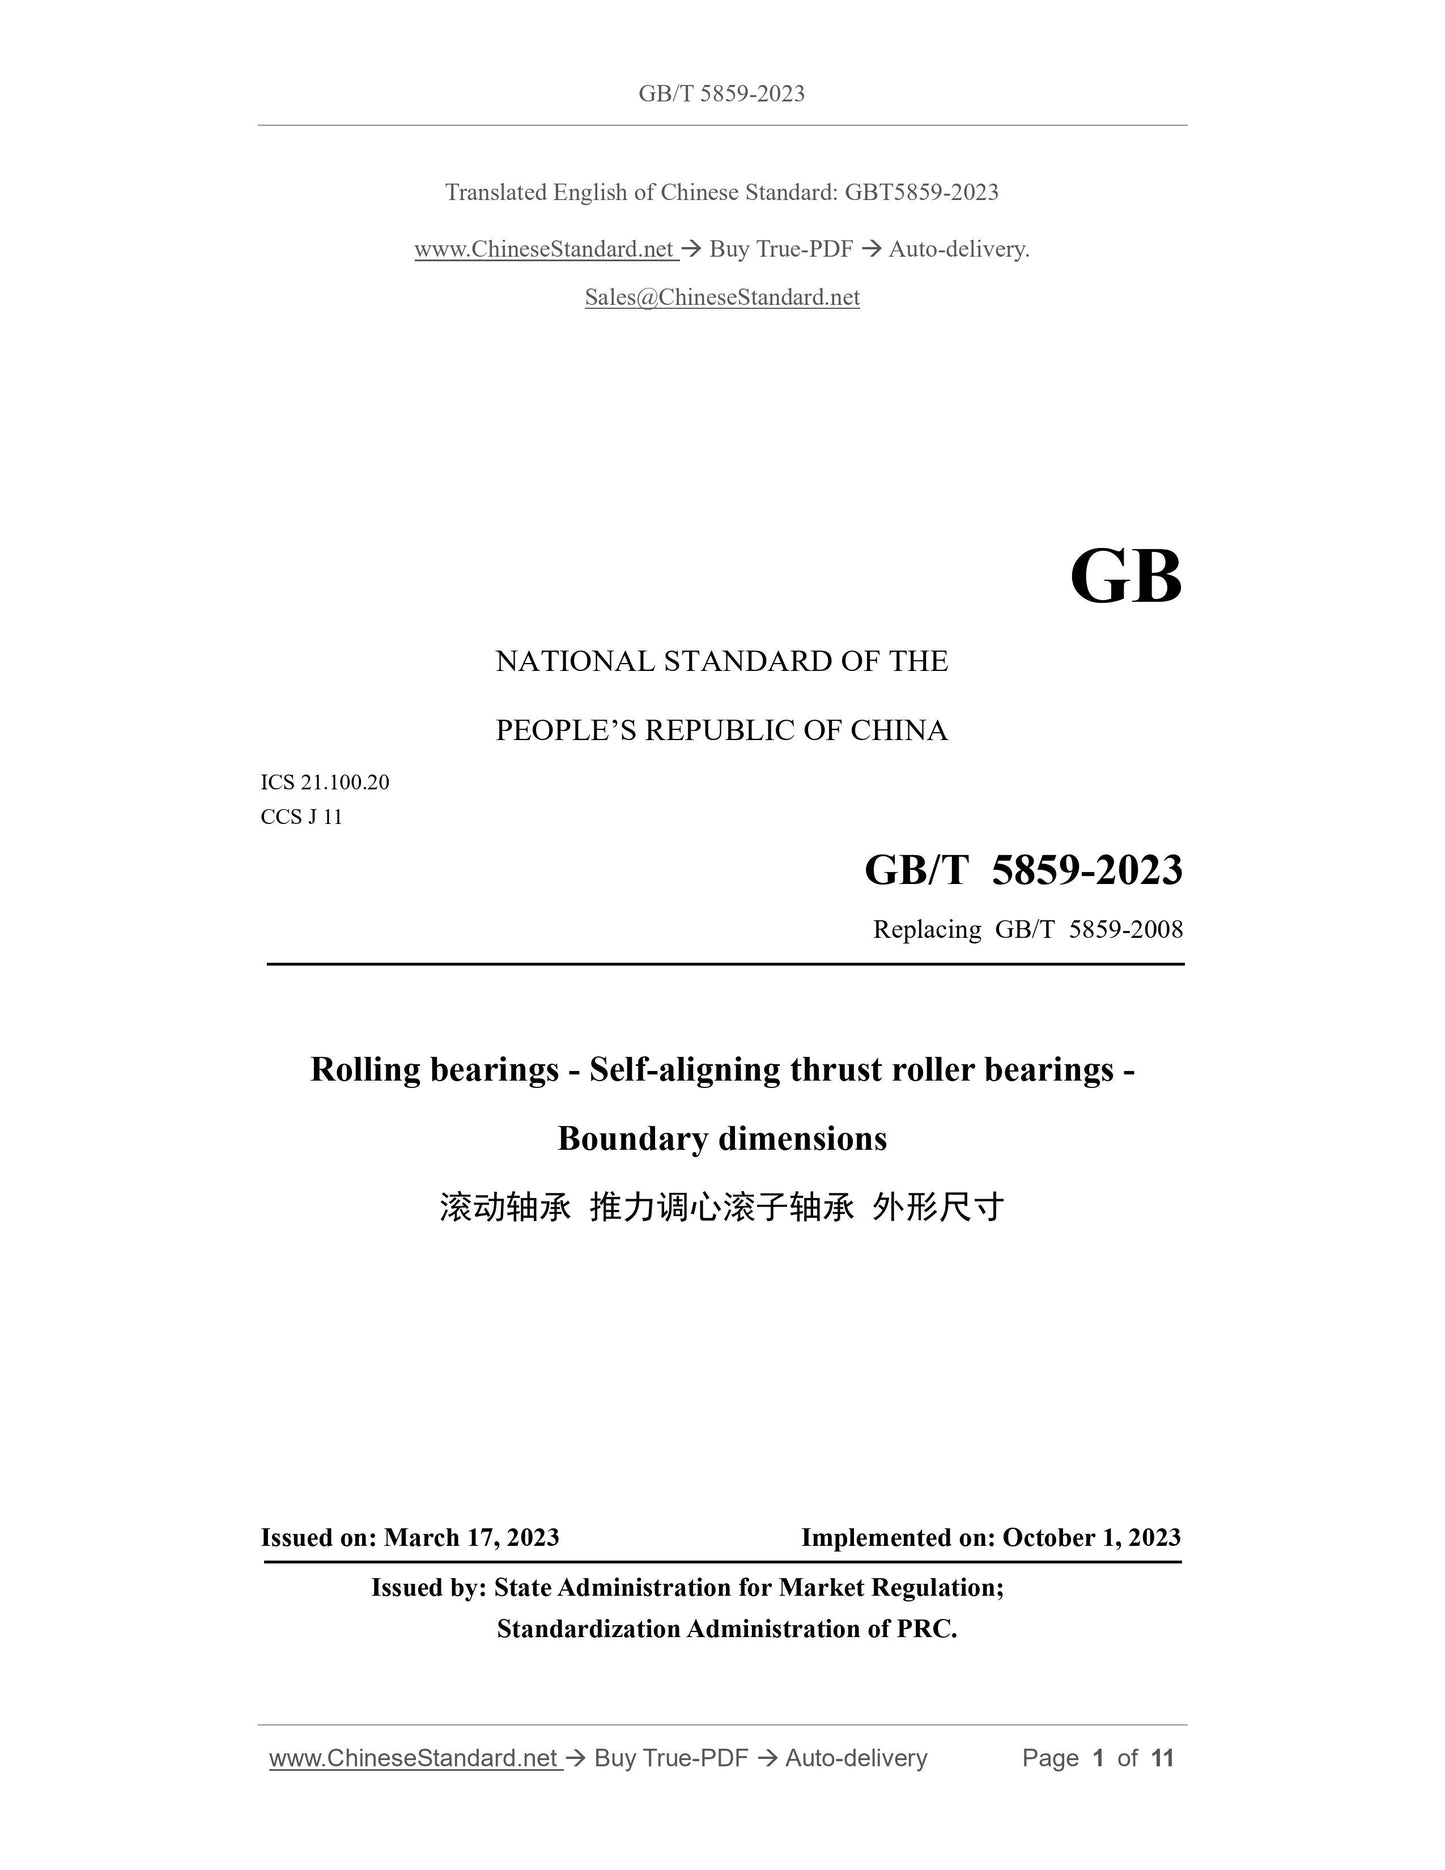 GB/T 5859-2023 Page 1